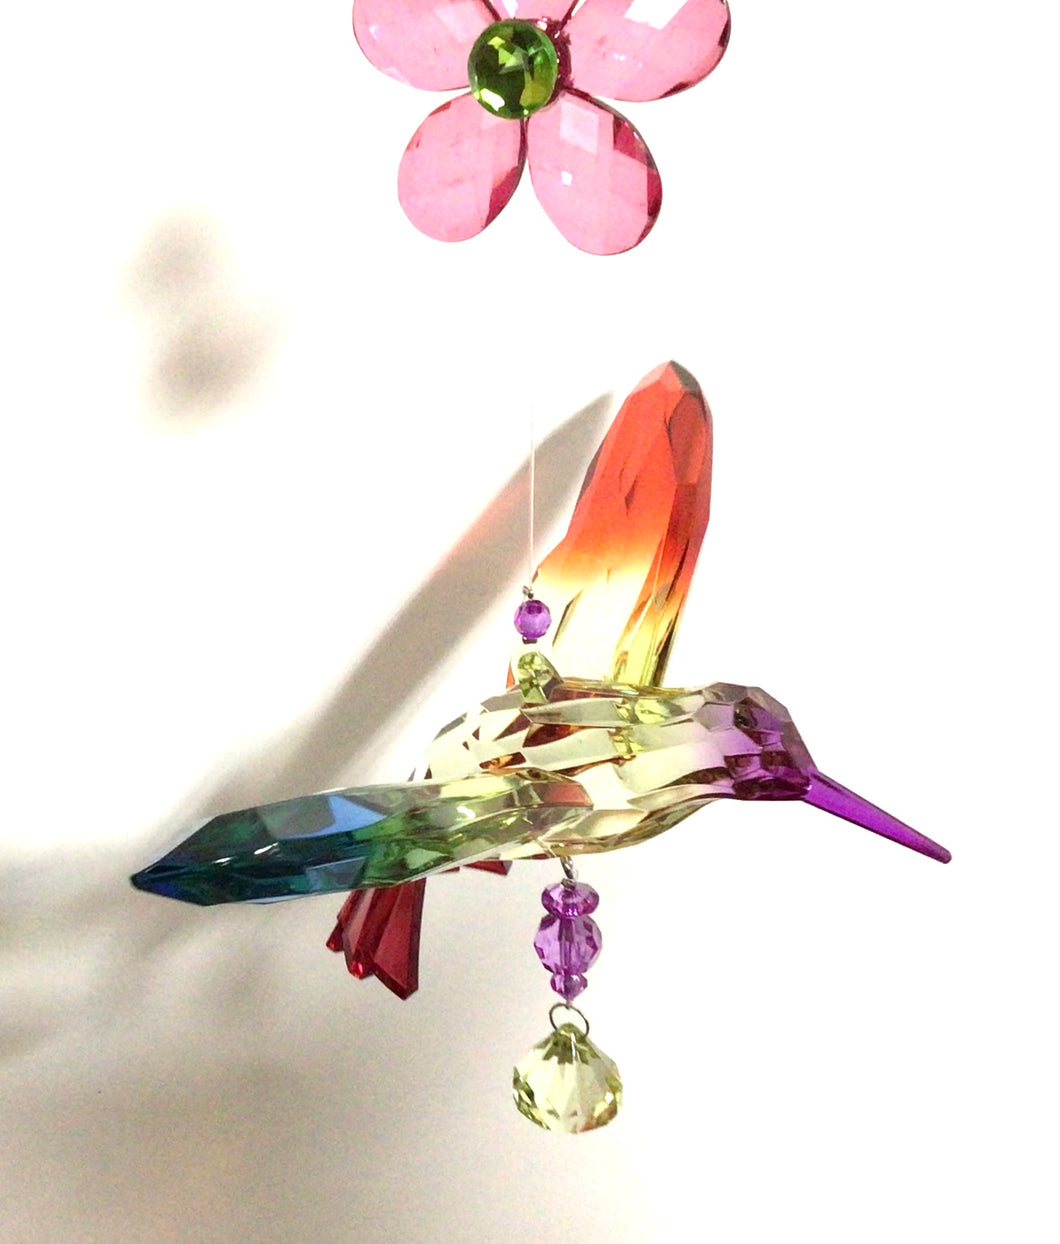 Five Tone Hanging Acrylic Hummingbird with Flower Ornament